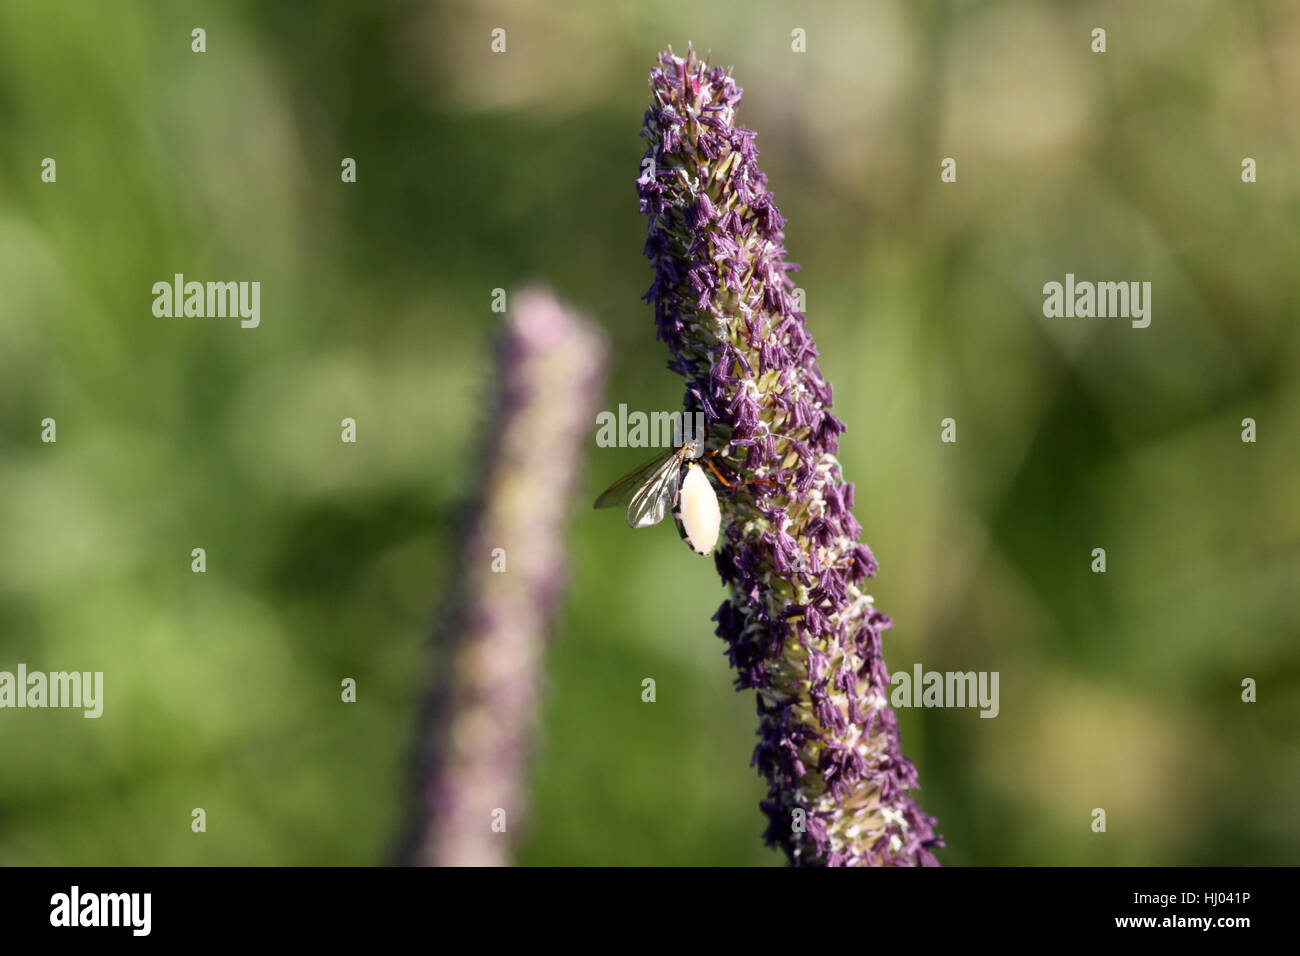 pollen, ear, insect, green, grasses, fly, pollen, ear, hayfever, anther, Stock Photo